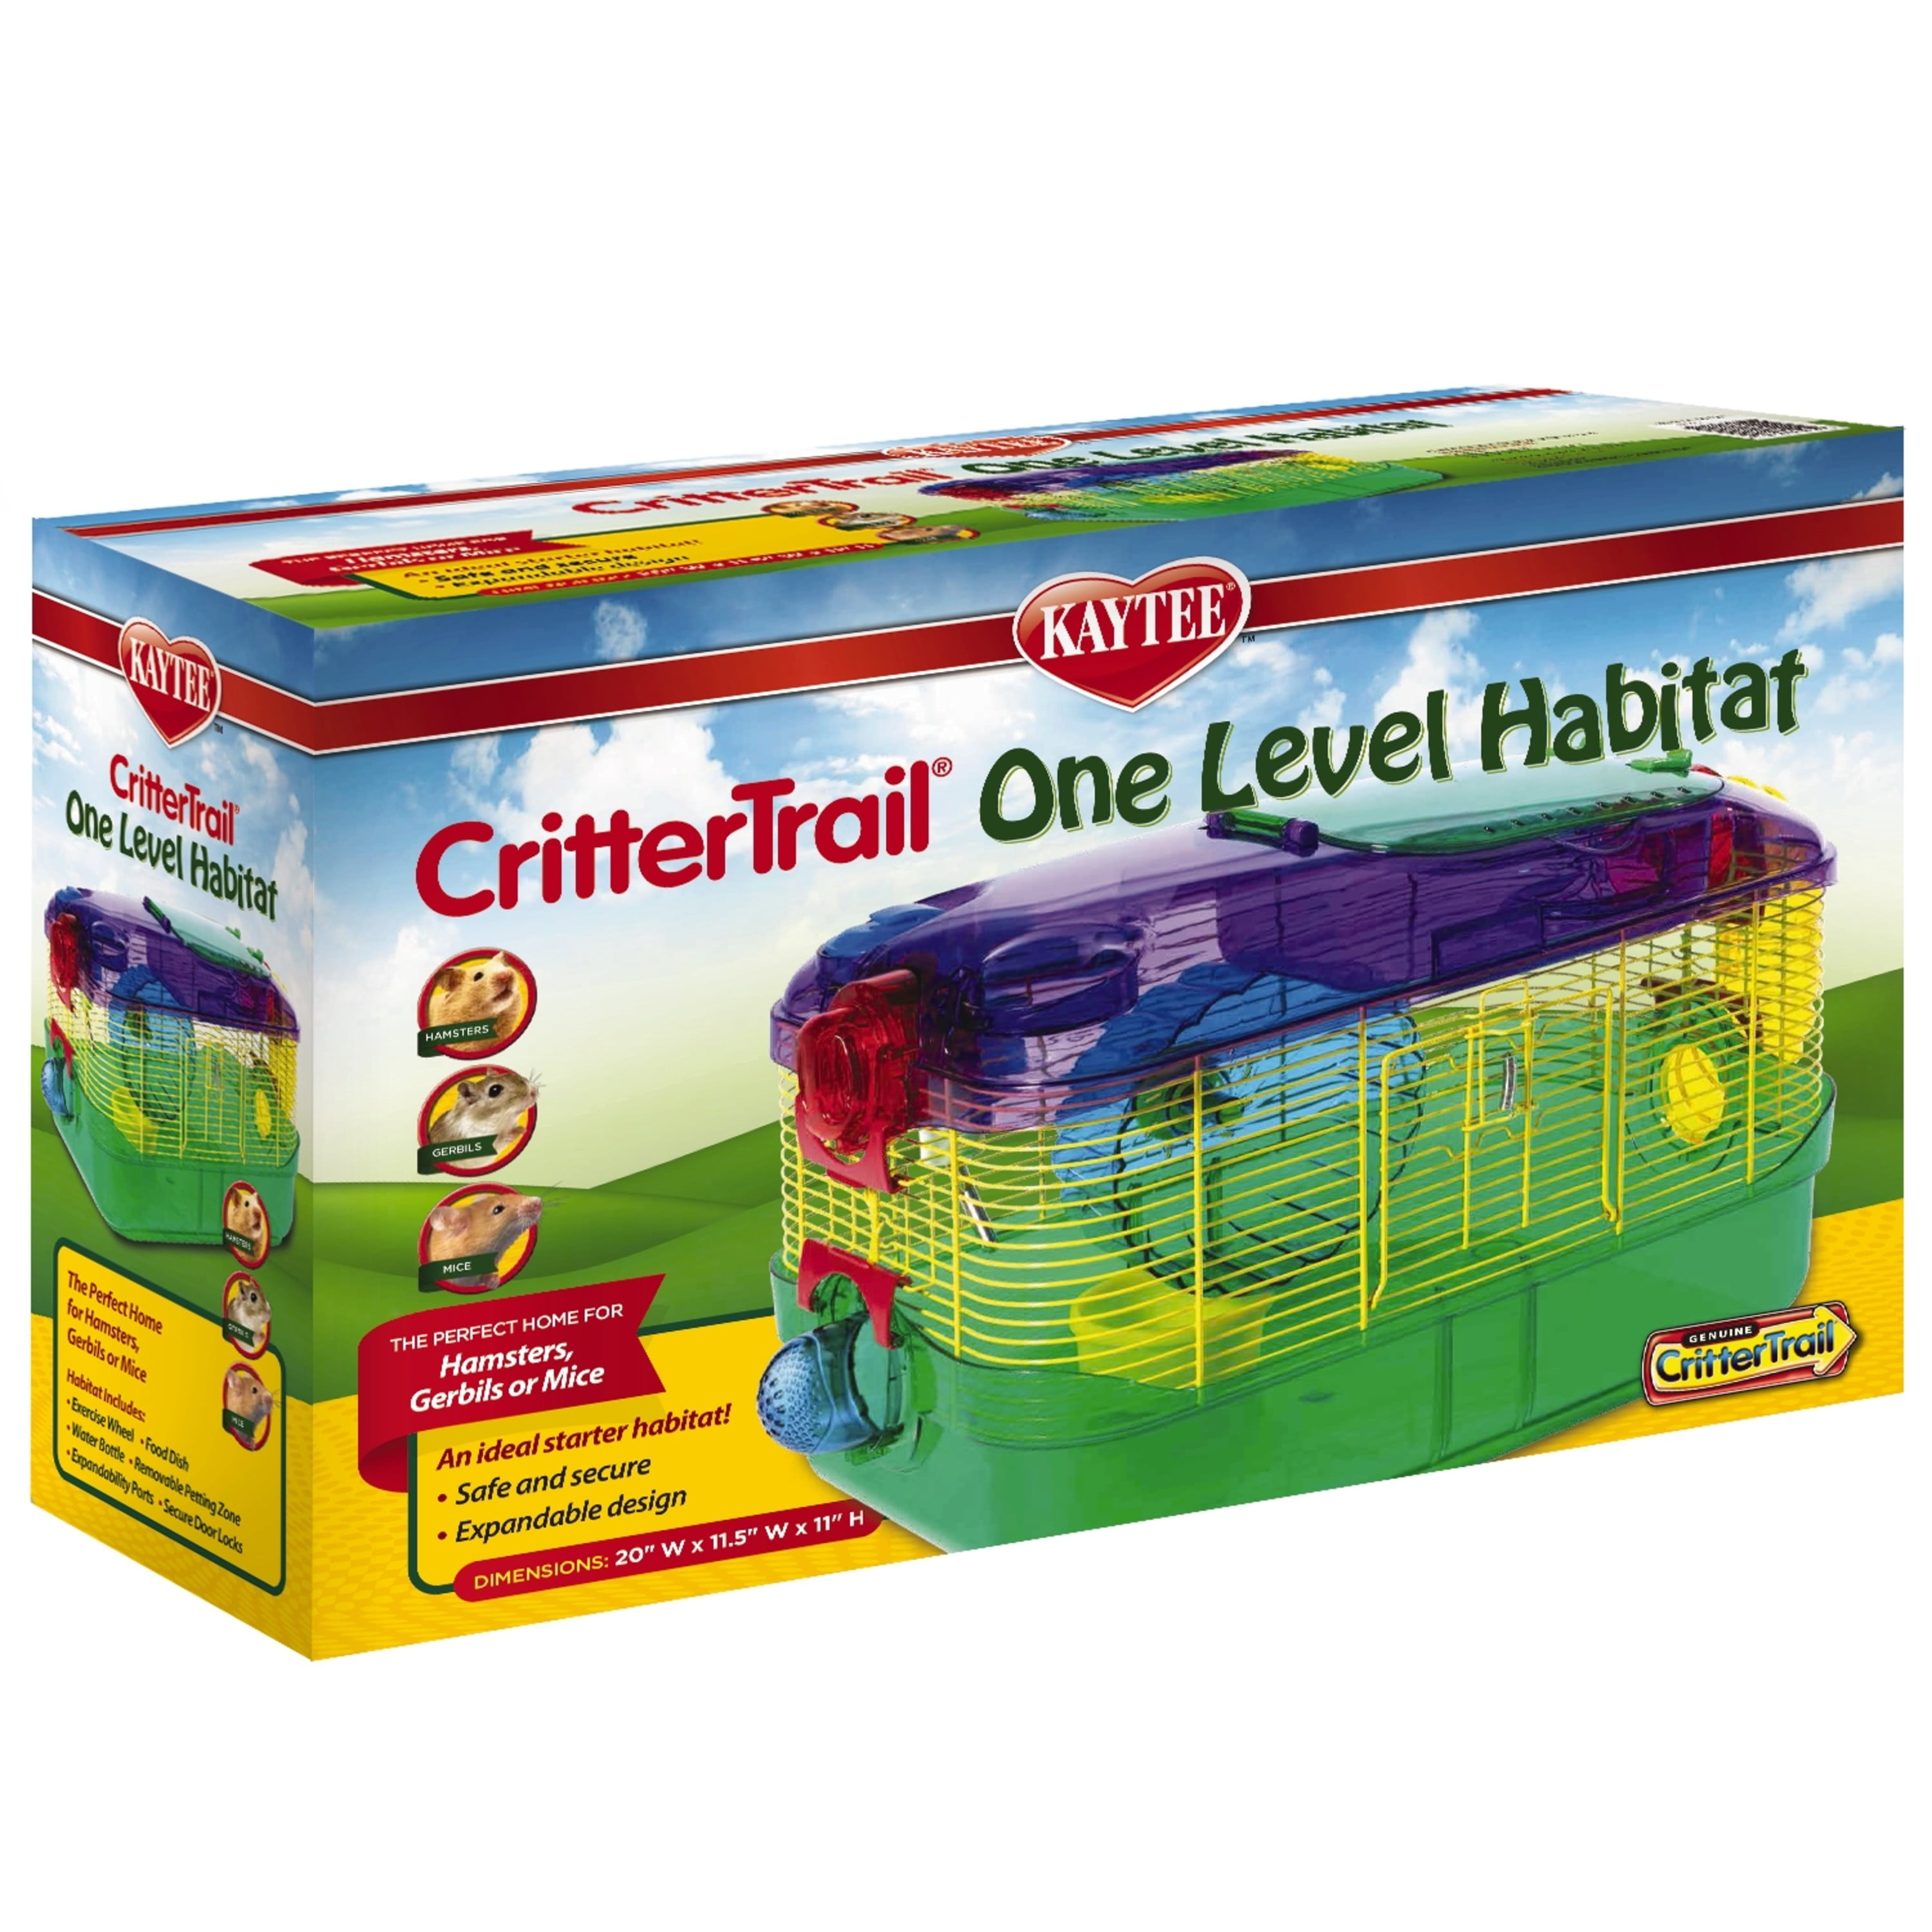 Super Pet Critter Trail Dazzle Turn-About Habitat Cage For Hamsters and Gerbils 